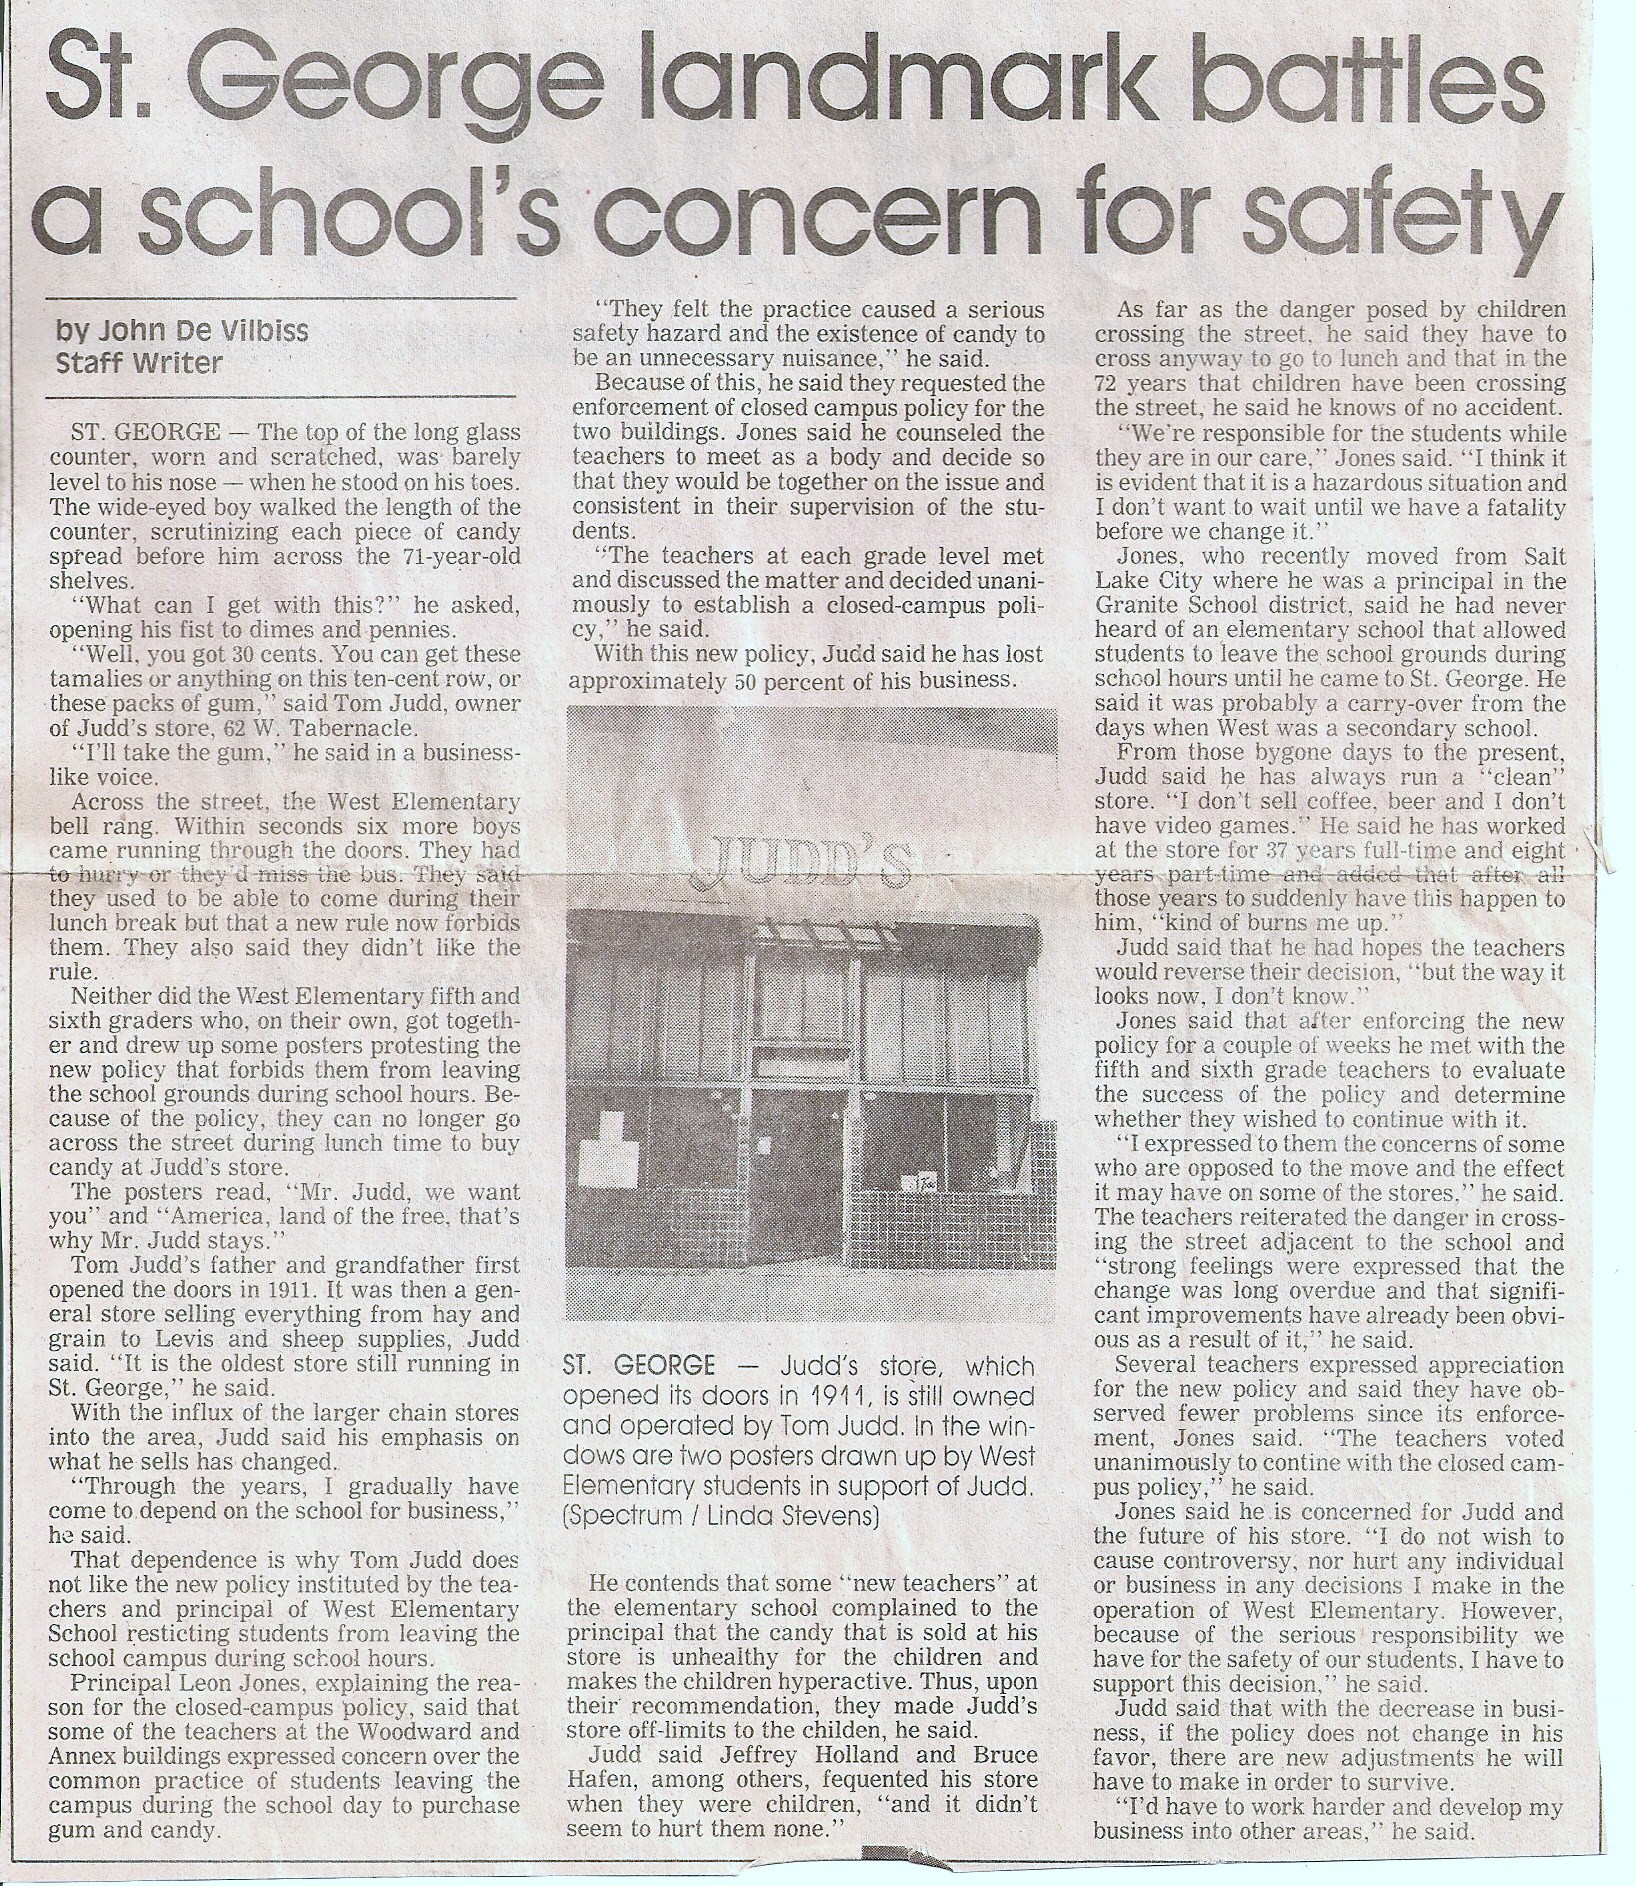 West Elementary School Closed Campus - Judd's Store Controversy Article